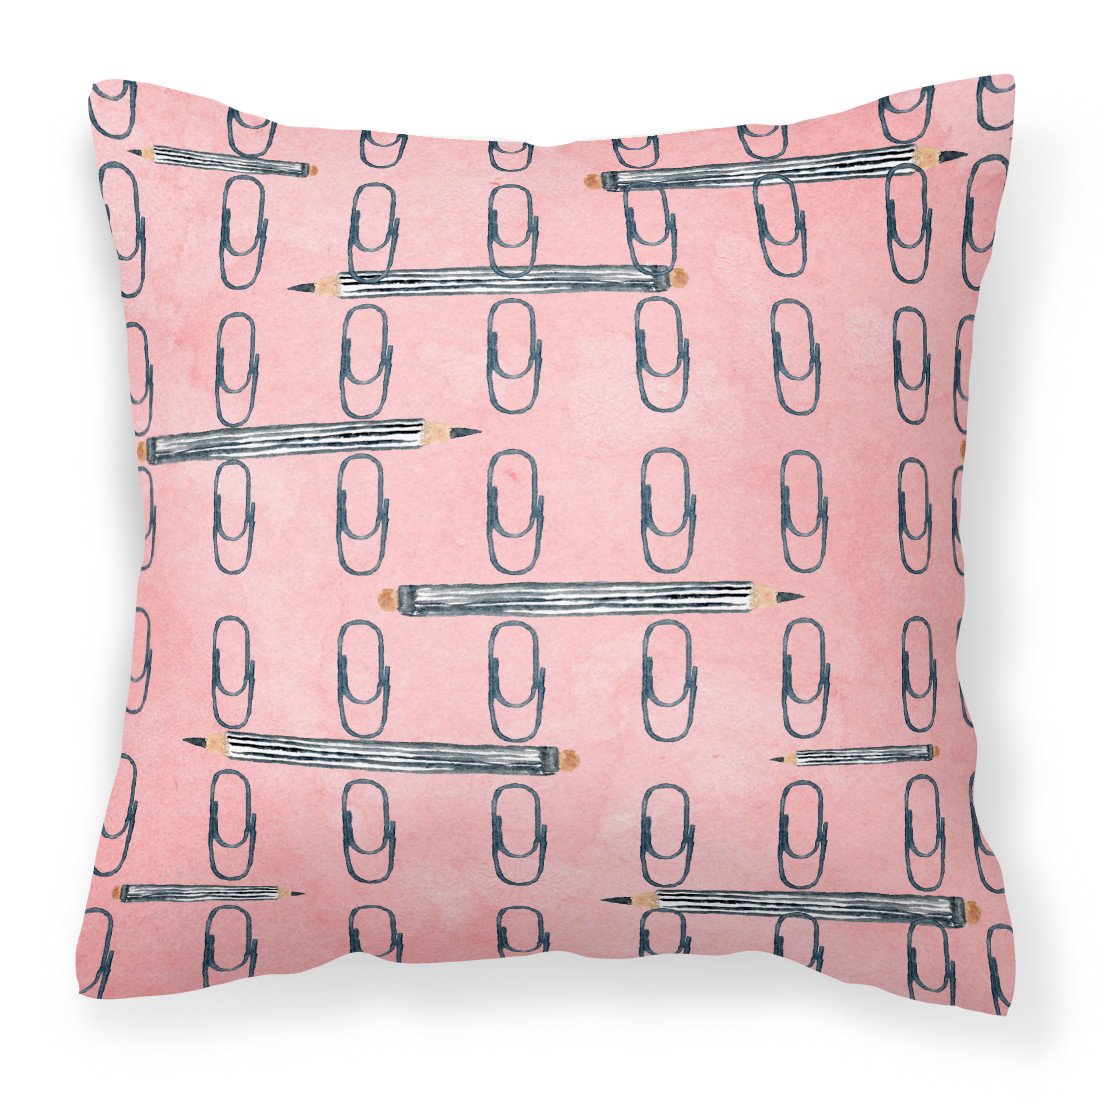 Watercolor Organized Paper Clips Pink Fabric Decorative Pillow BB7539PW1818 by Caroline's Treasures